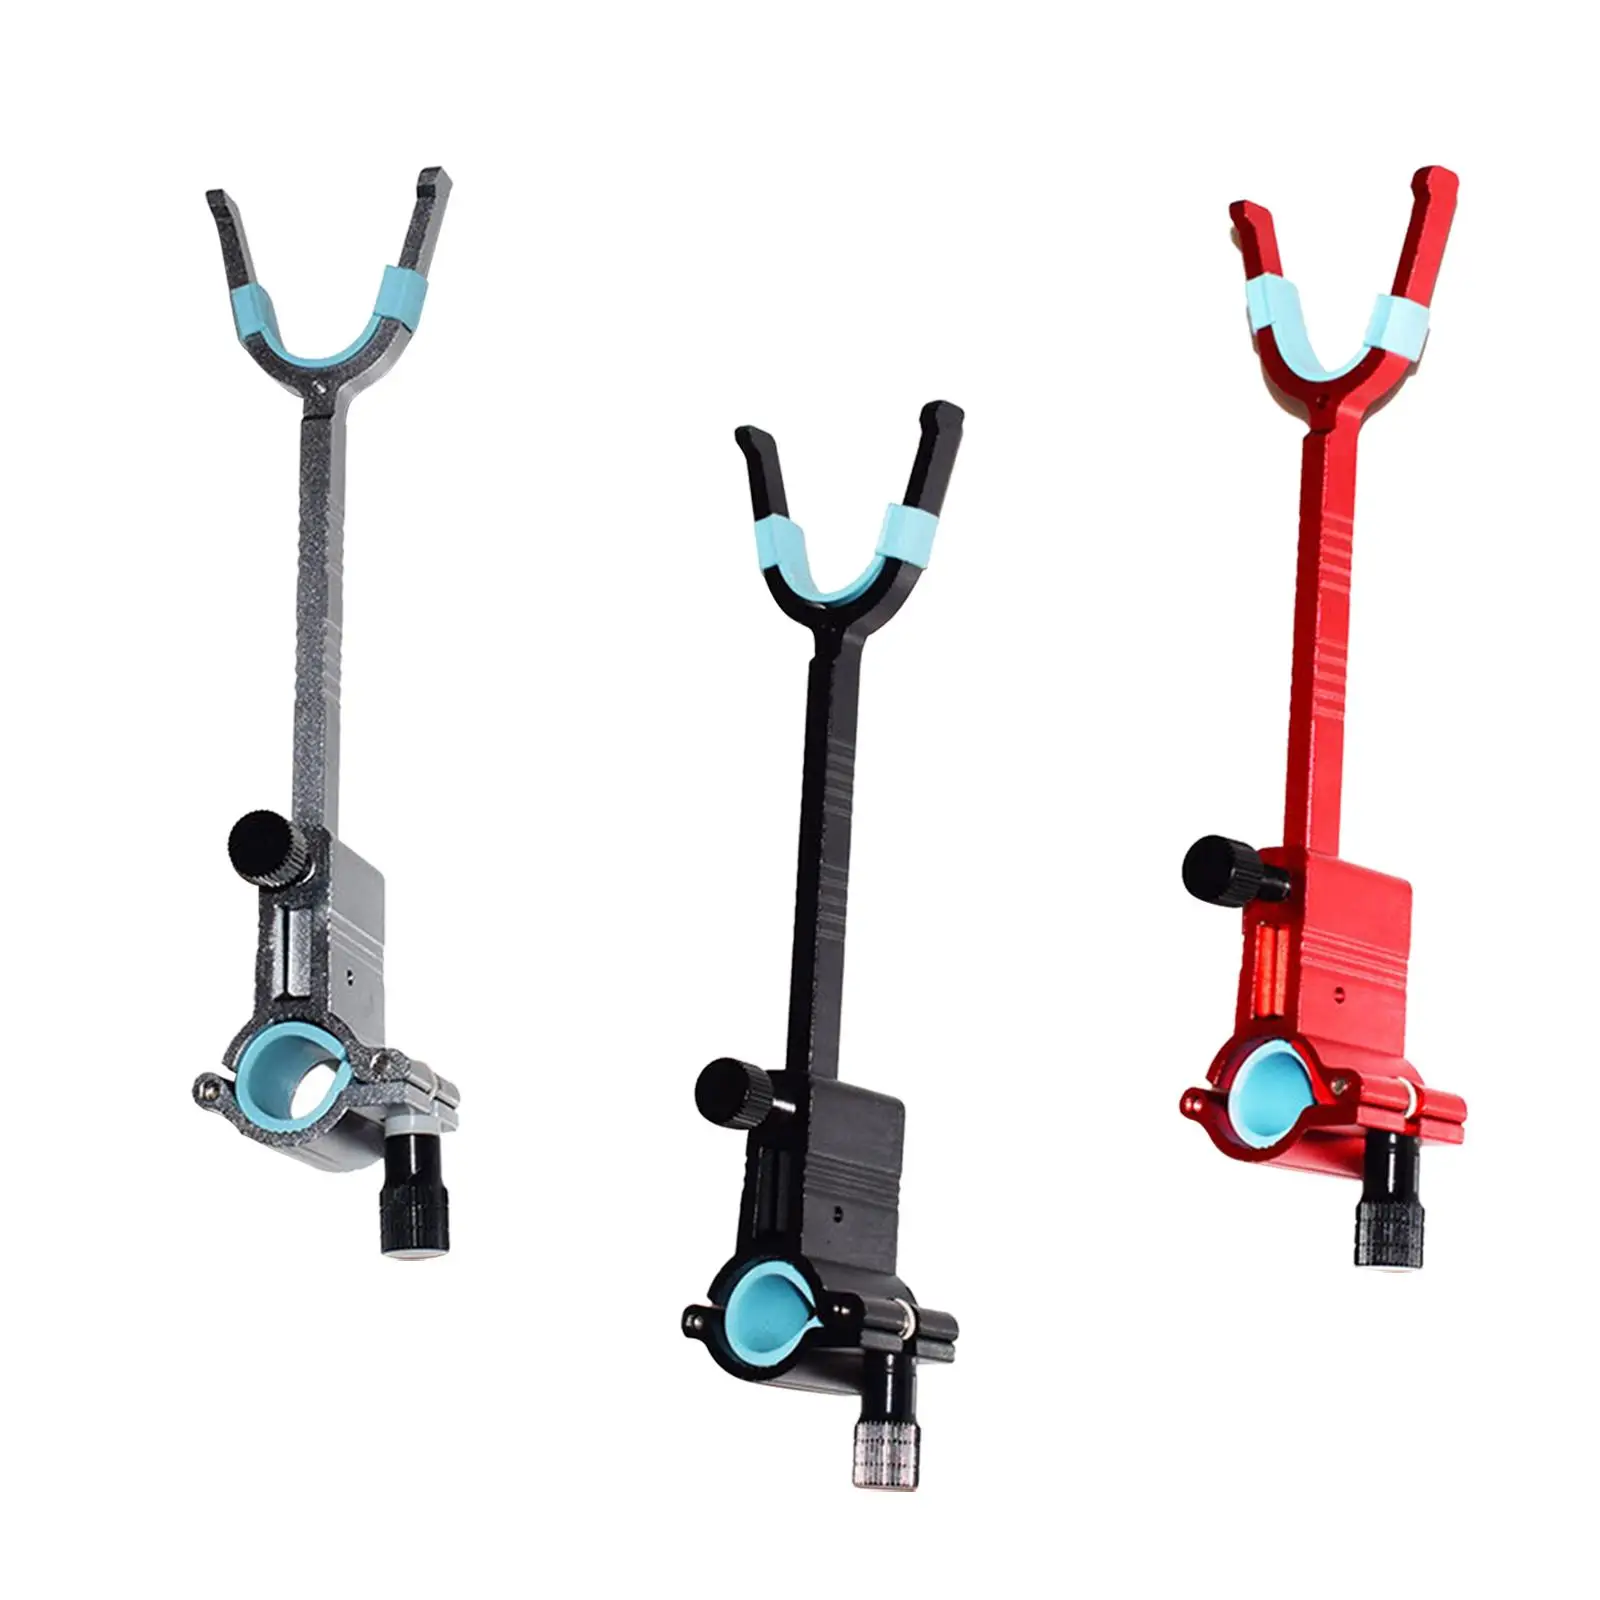 Rod Holders for Bank Fishing Extending Rod Rest Portable Fishing Rod Bracket Fishing Pole Holder for Rivers Fishing Gear